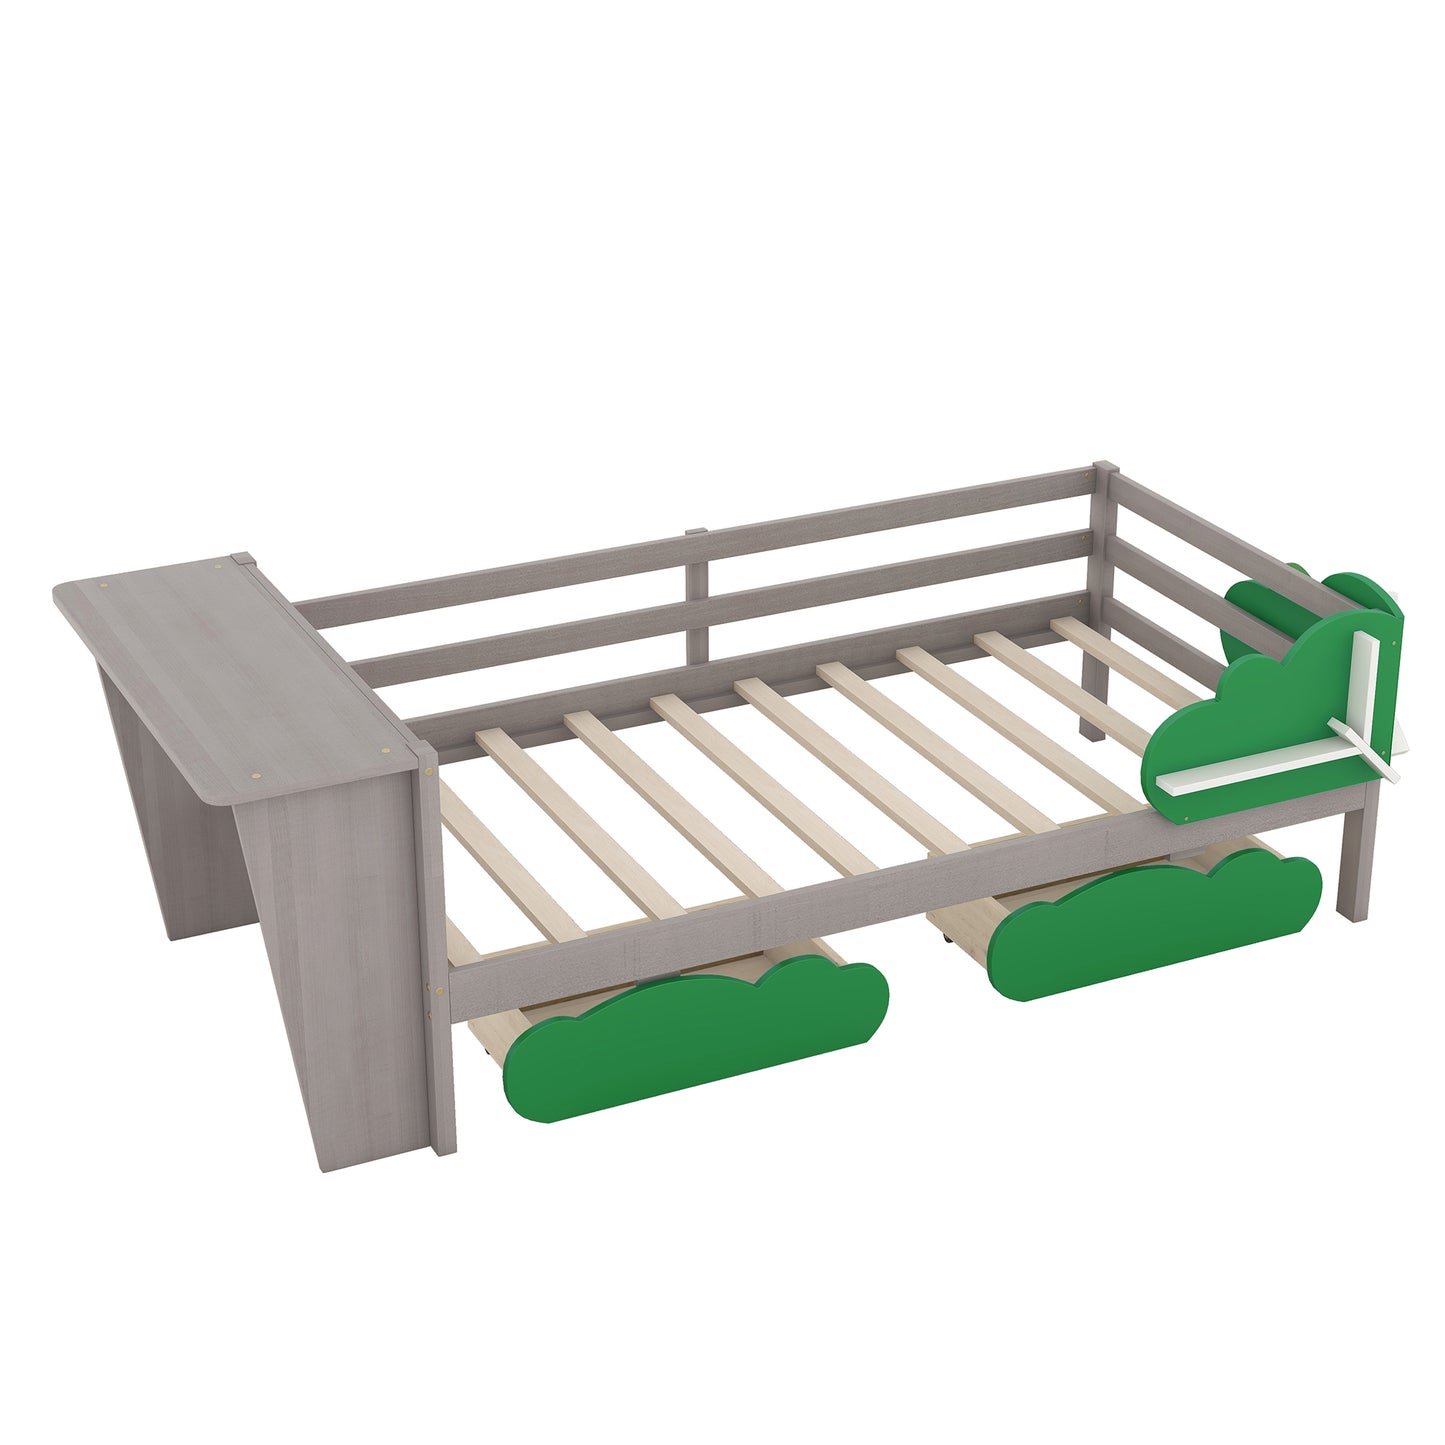 Twin Size Daybed with Desk, Green Leaf Shape Drawers and Shelves, Gray